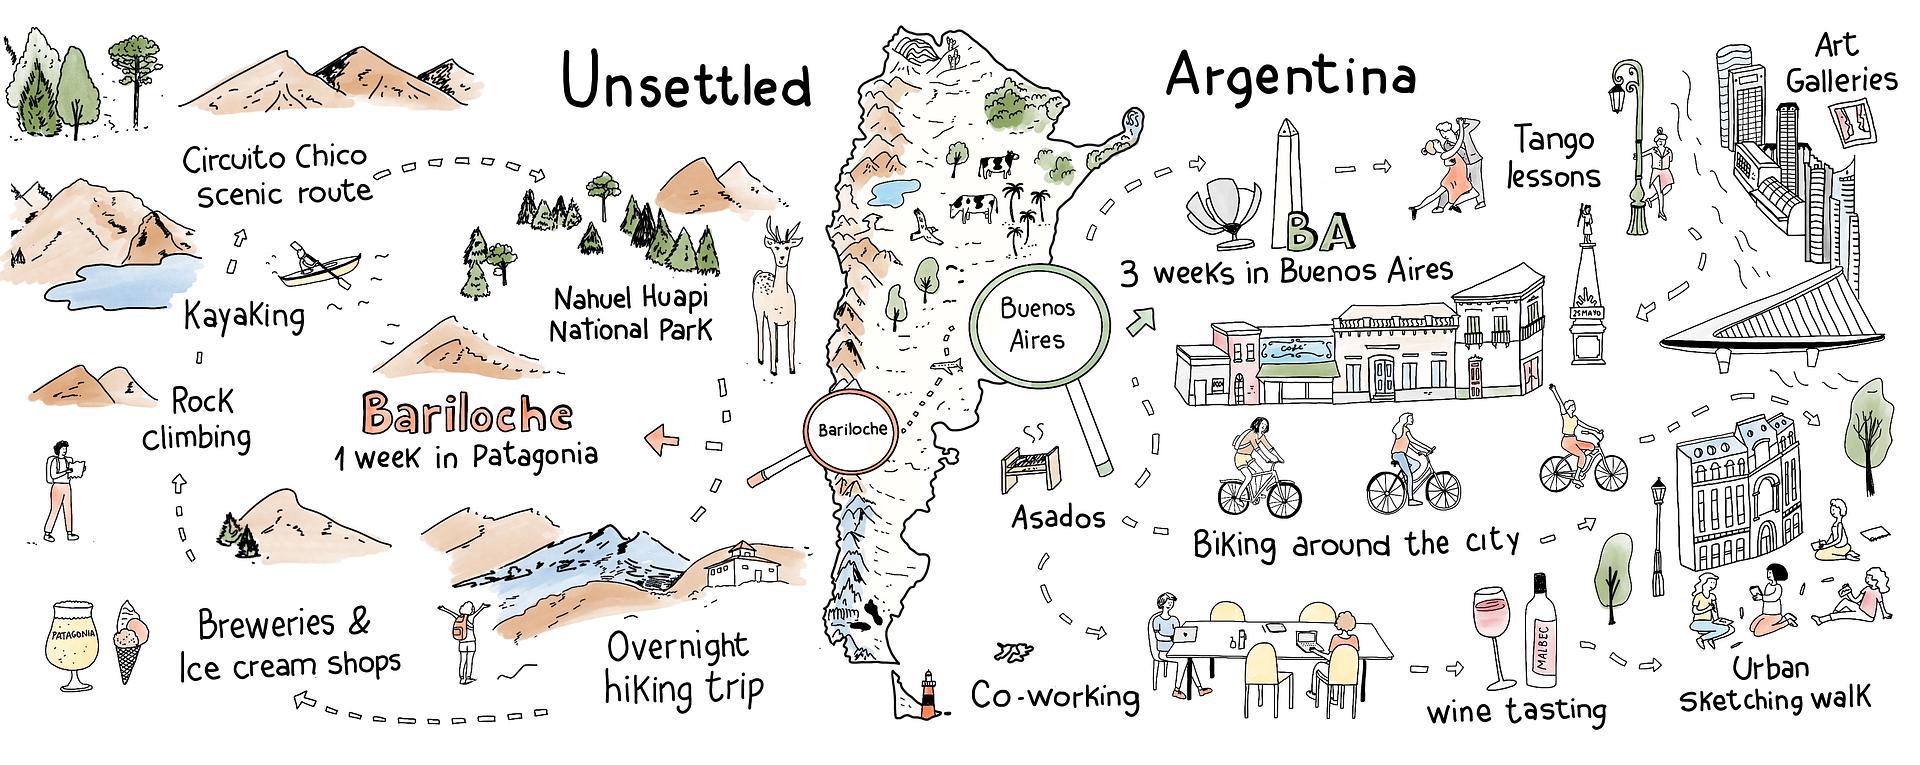 Unsettled Argentina